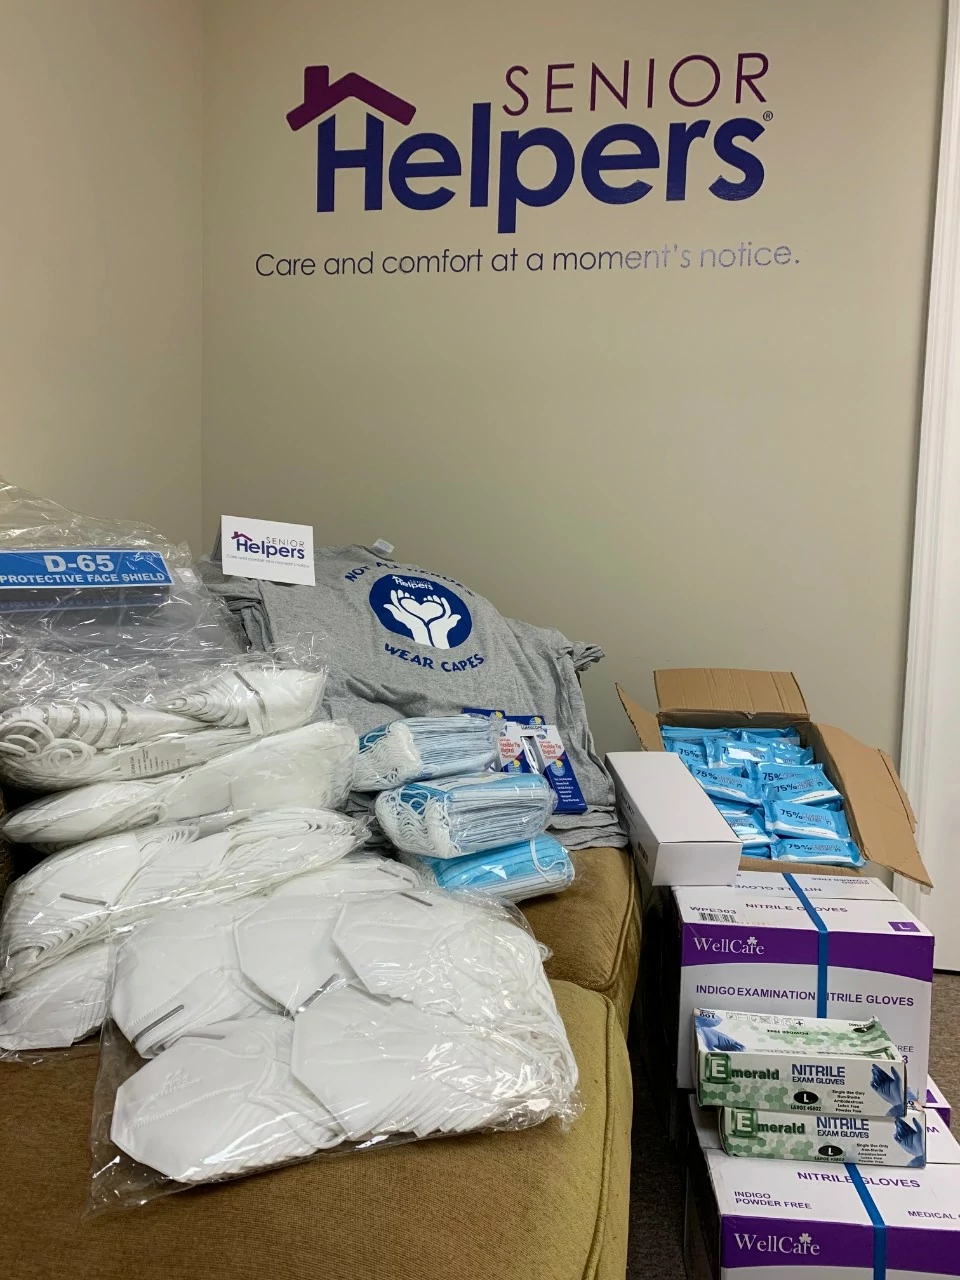 Recent PPE shipment - We are prepared and ready to care for our clients in a safe environment